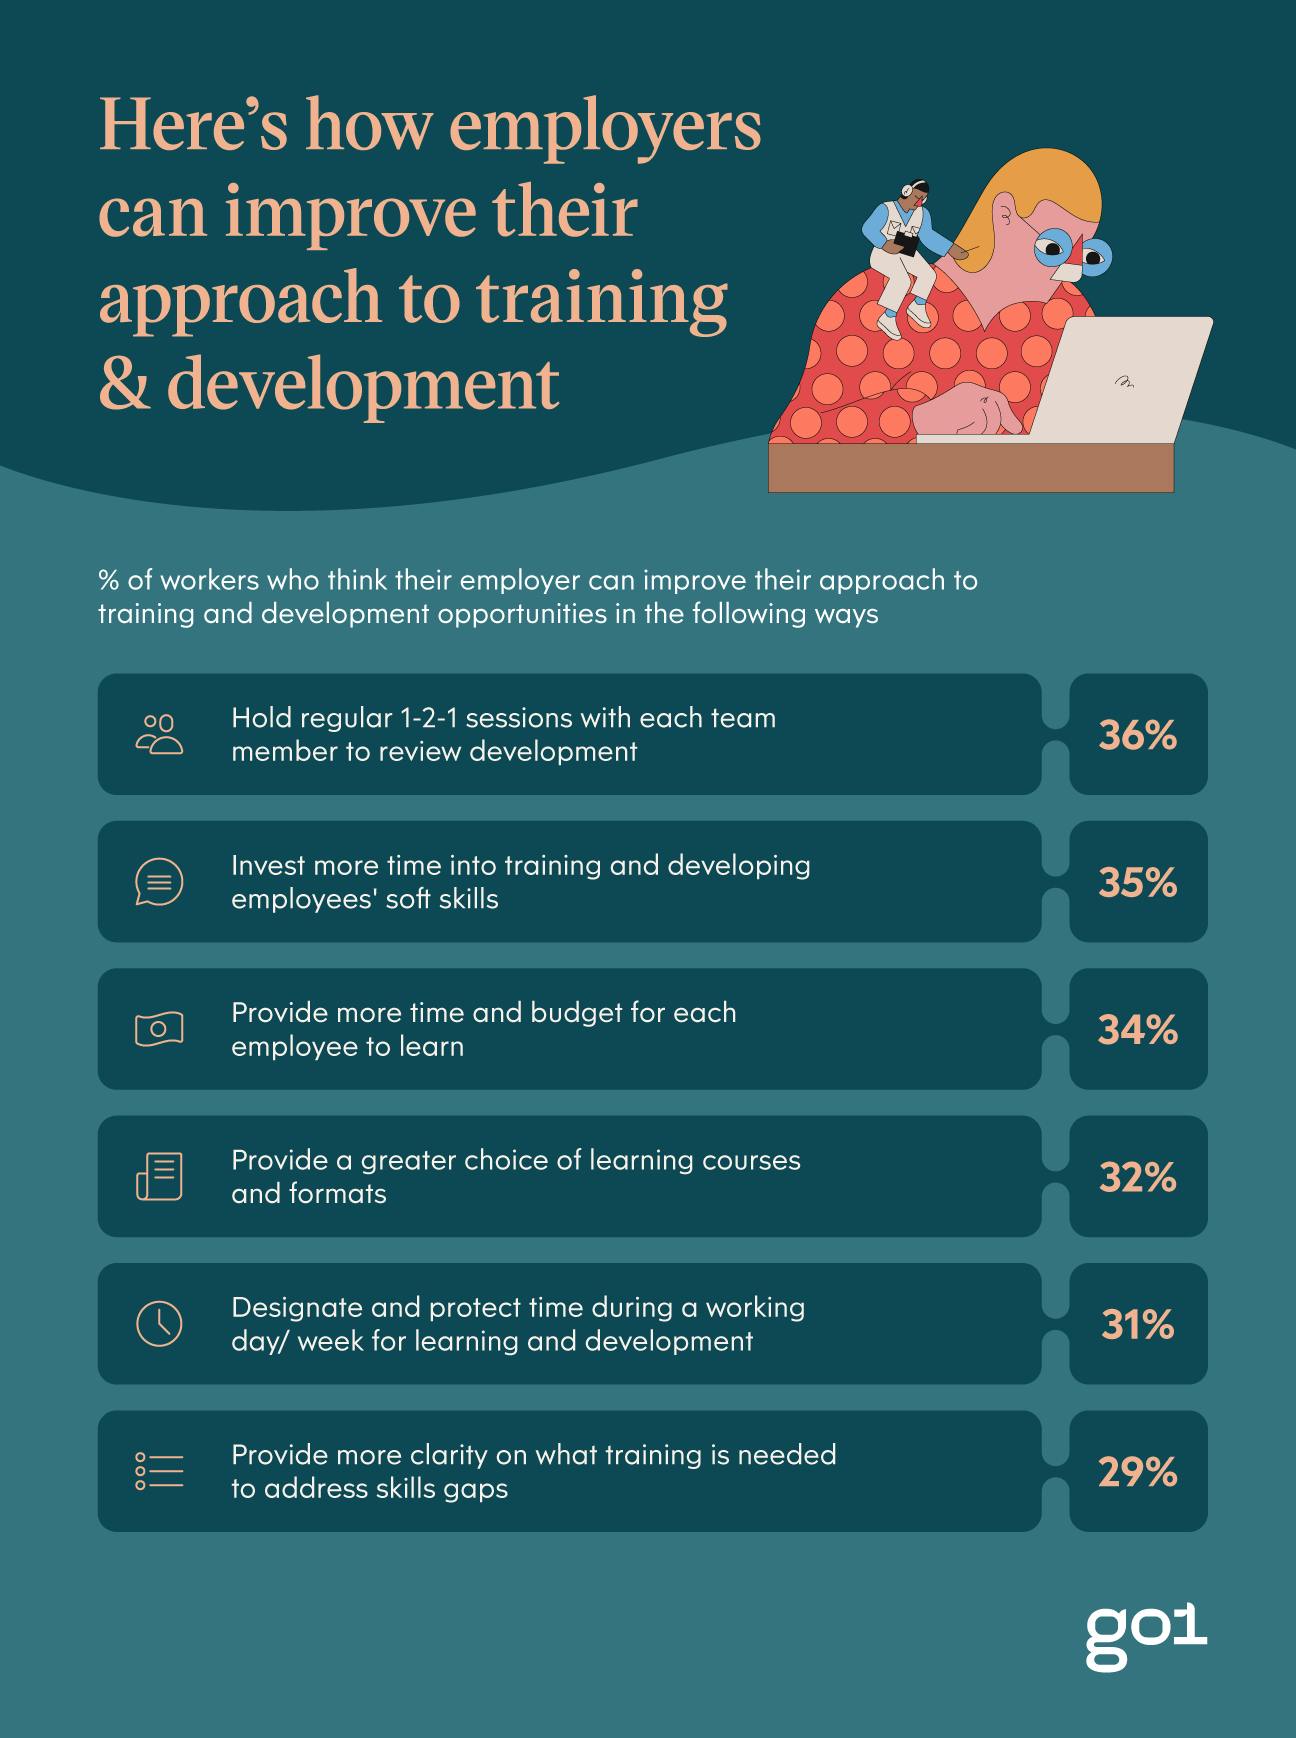 An image displaying 6 ways in which employers can better their training methods